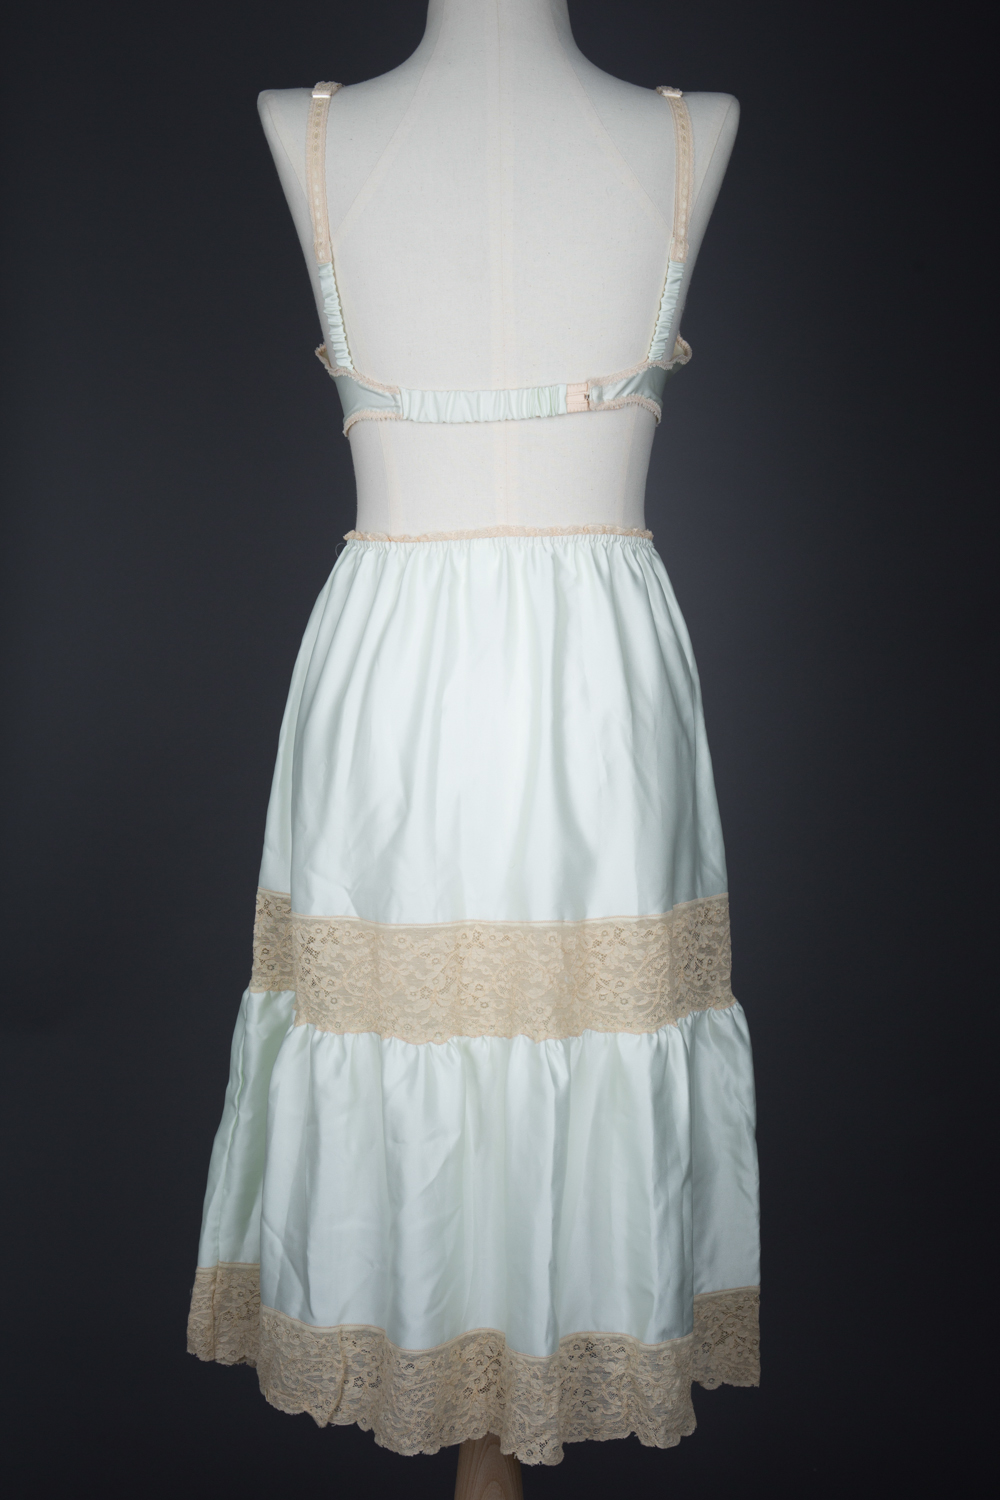 Embroidered Lace & Polyester Satin Bra & Half Slip Set By Janet Reger, c. 1970s, Great Britain. The Underpinnings Museum. Photography by Tigz Rice.